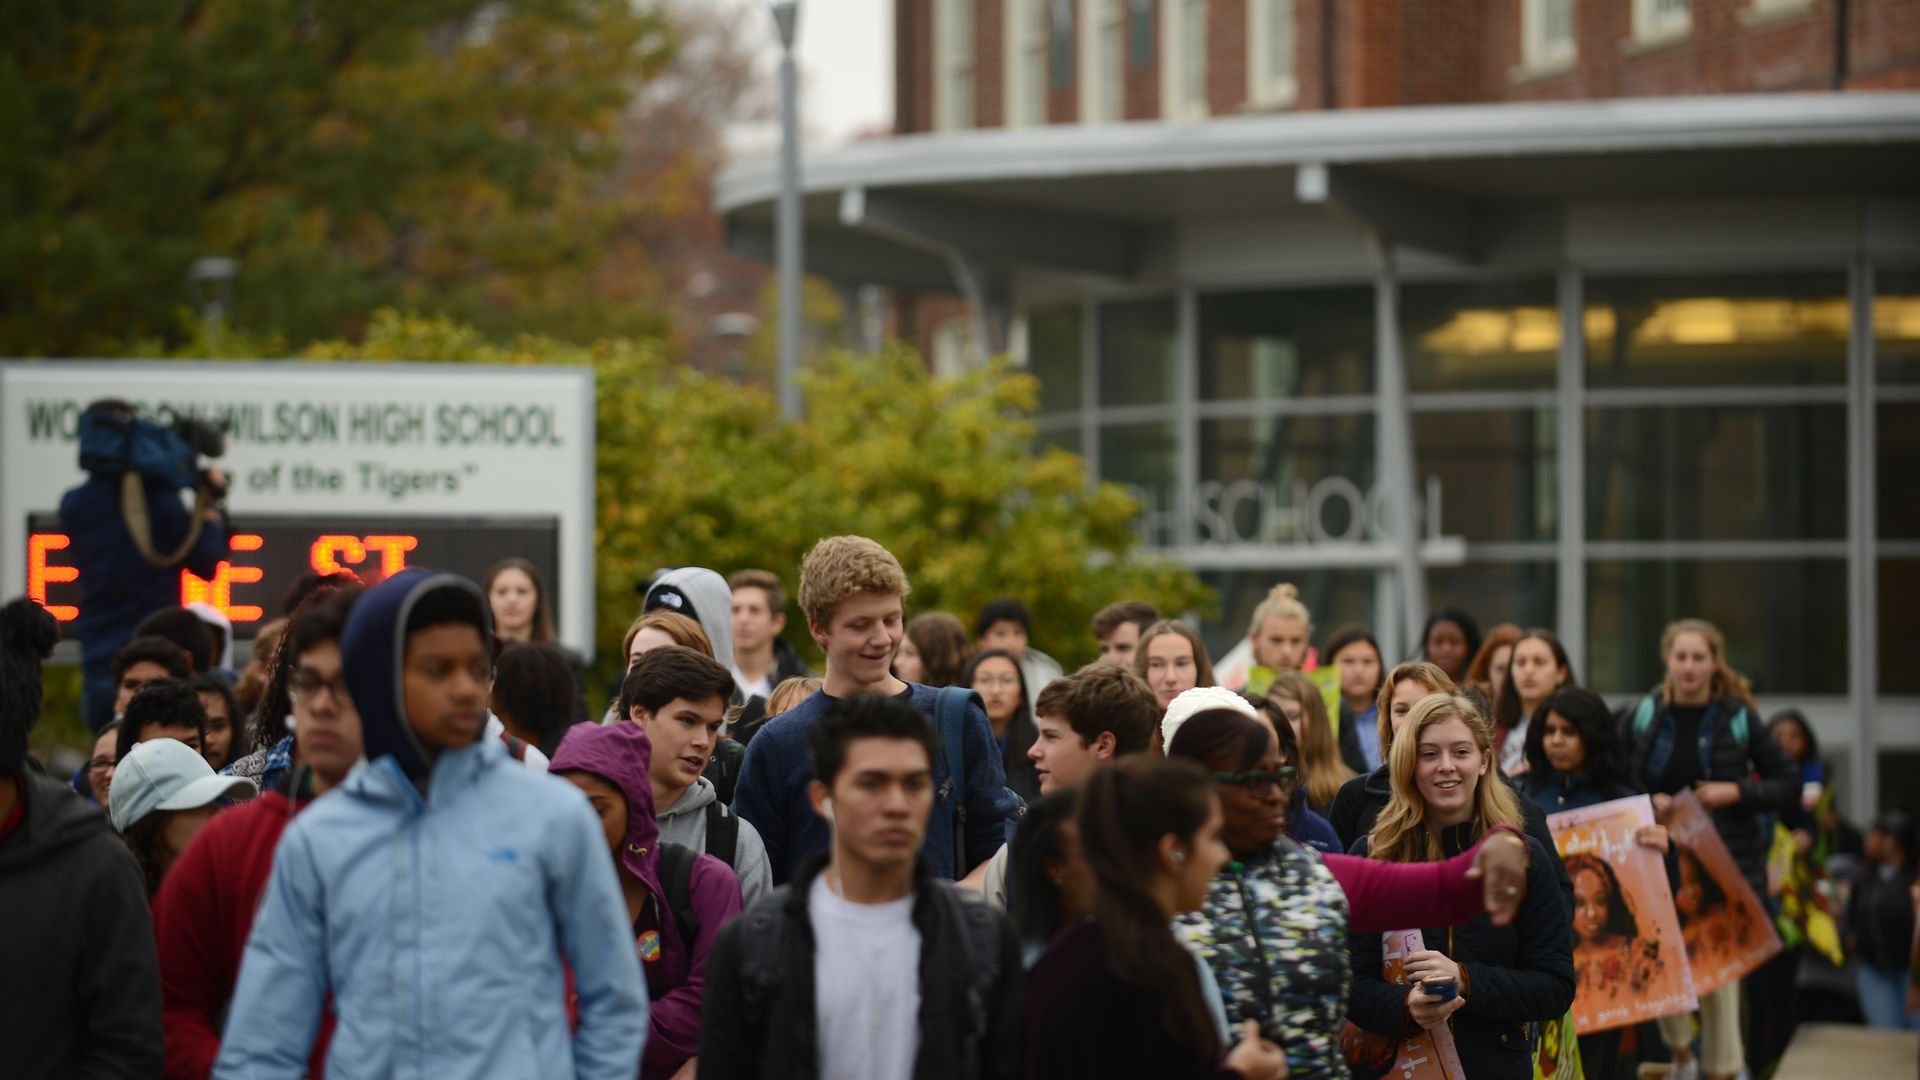 A photograph of students exiting Wilson High School in the background